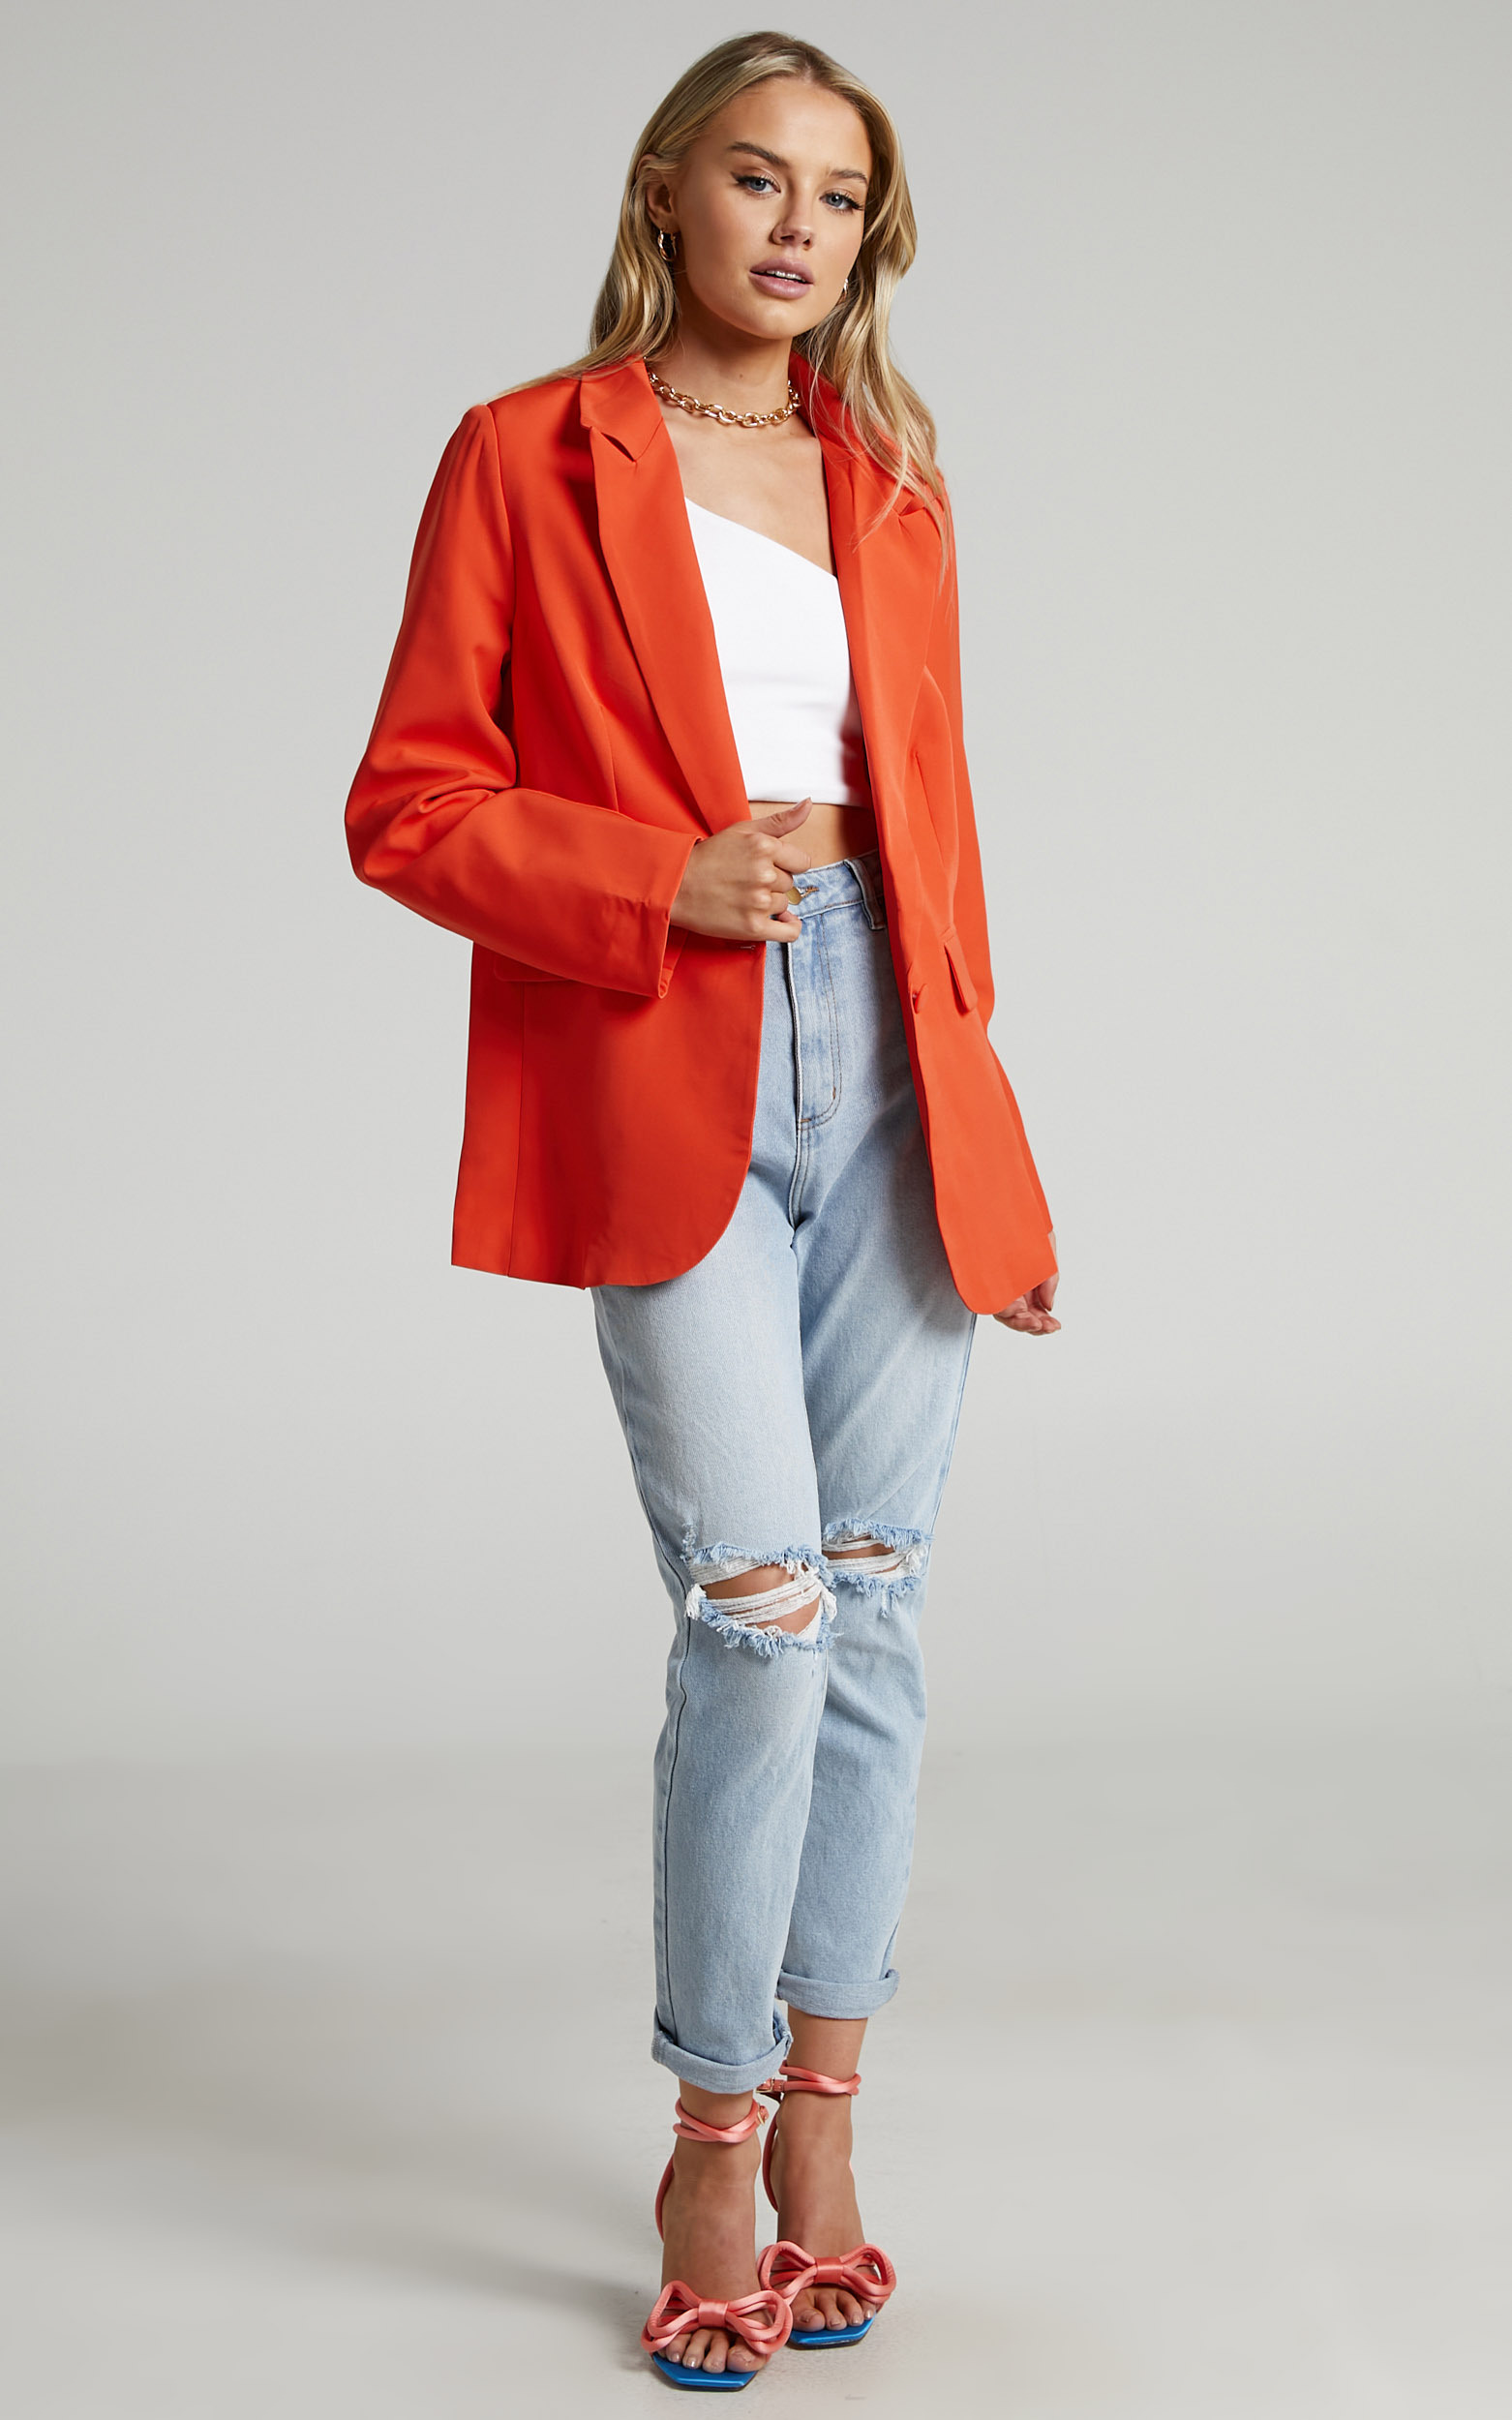 Ashesha Tailored Suiting Blazer in Oxy Fire - 04, RED2, hi-res image number null